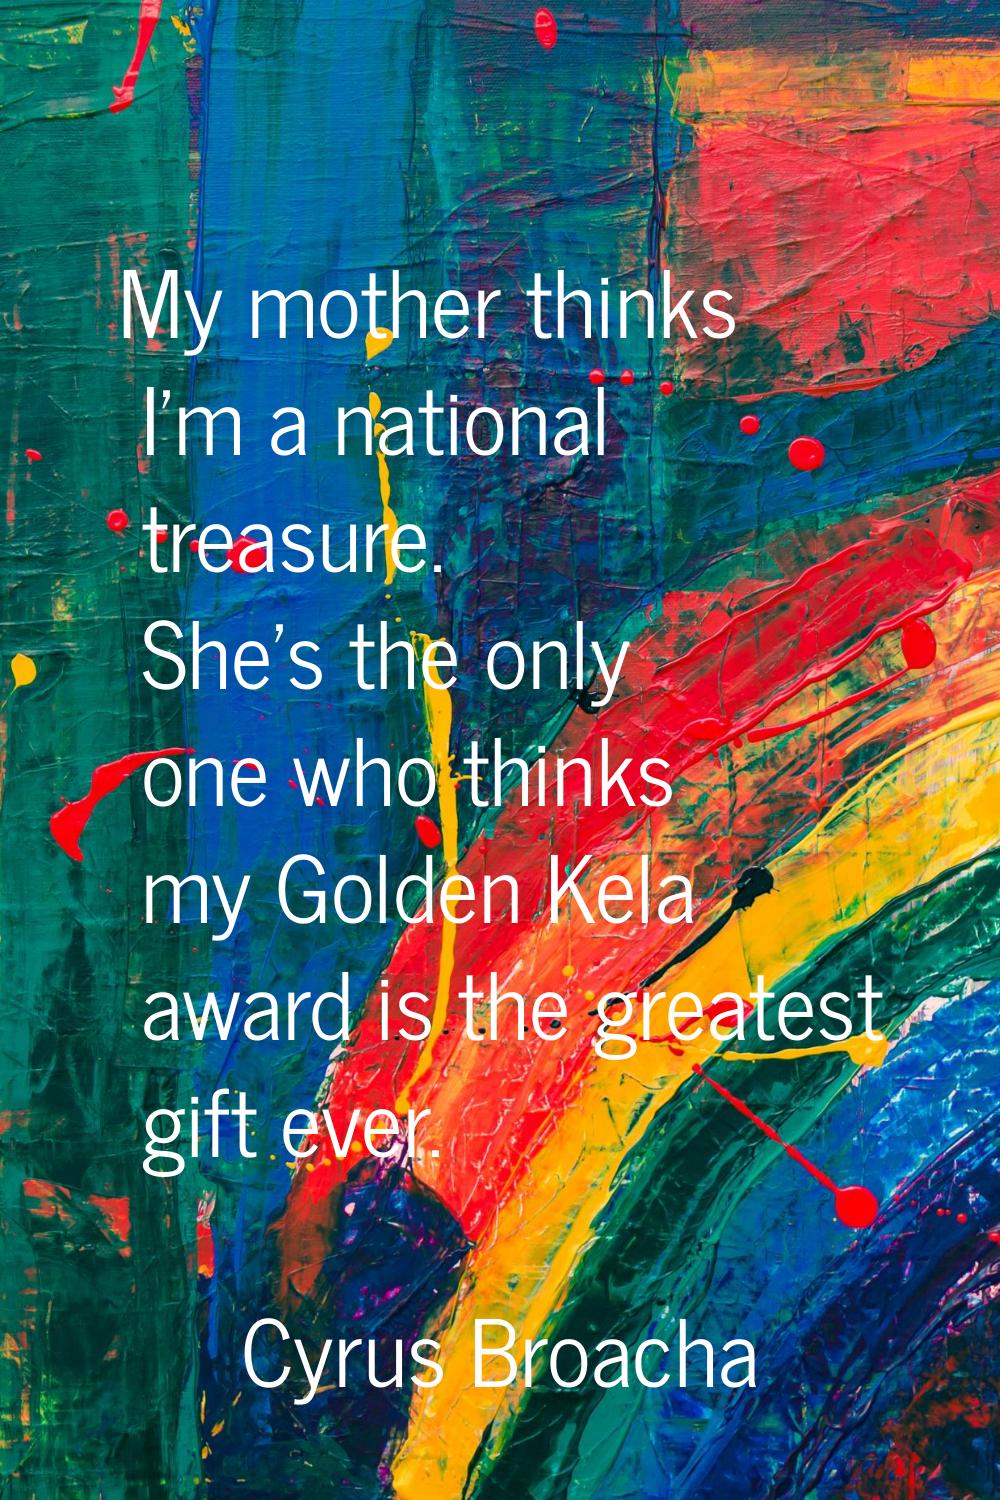 My mother thinks I'm a national treasure. She's the only one who thinks my Golden Kela award is the